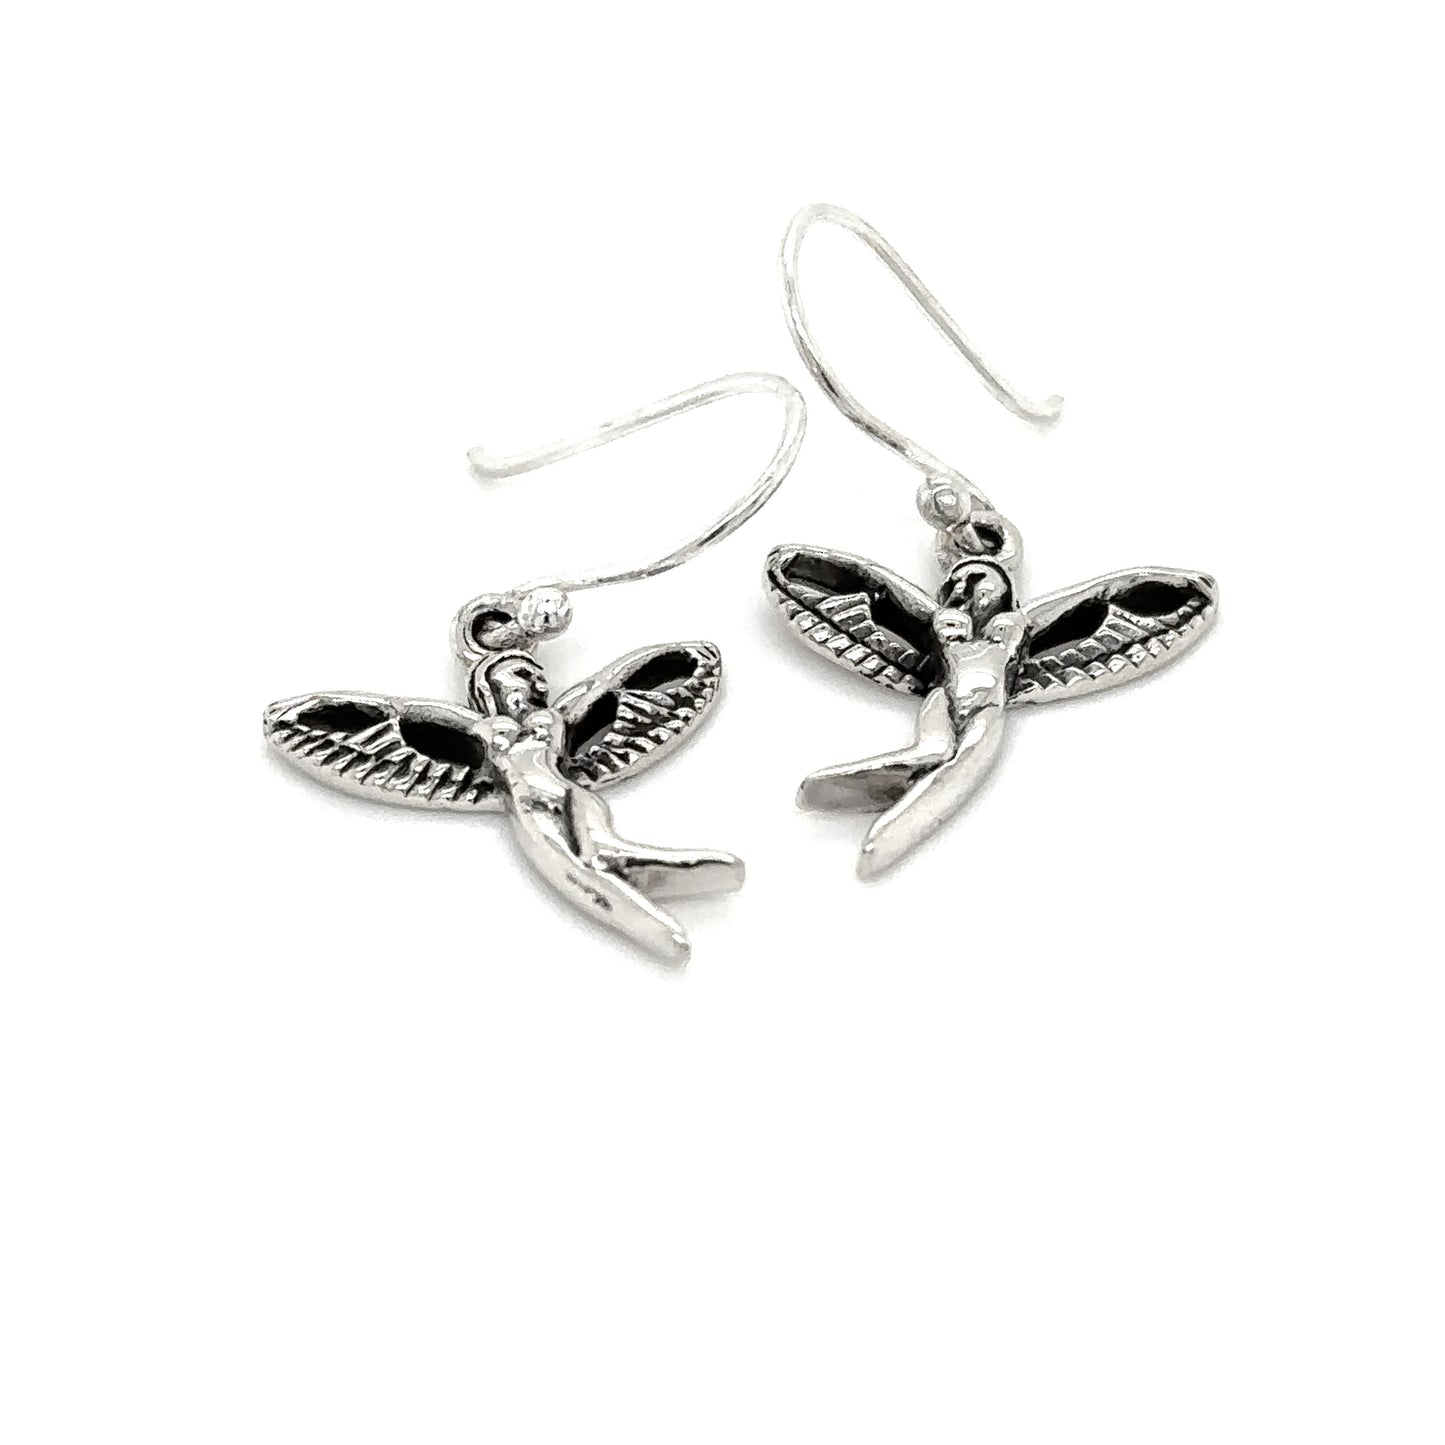 A pair of Fairy Dangle Earrings with hummingbirds on them by Super Silver.